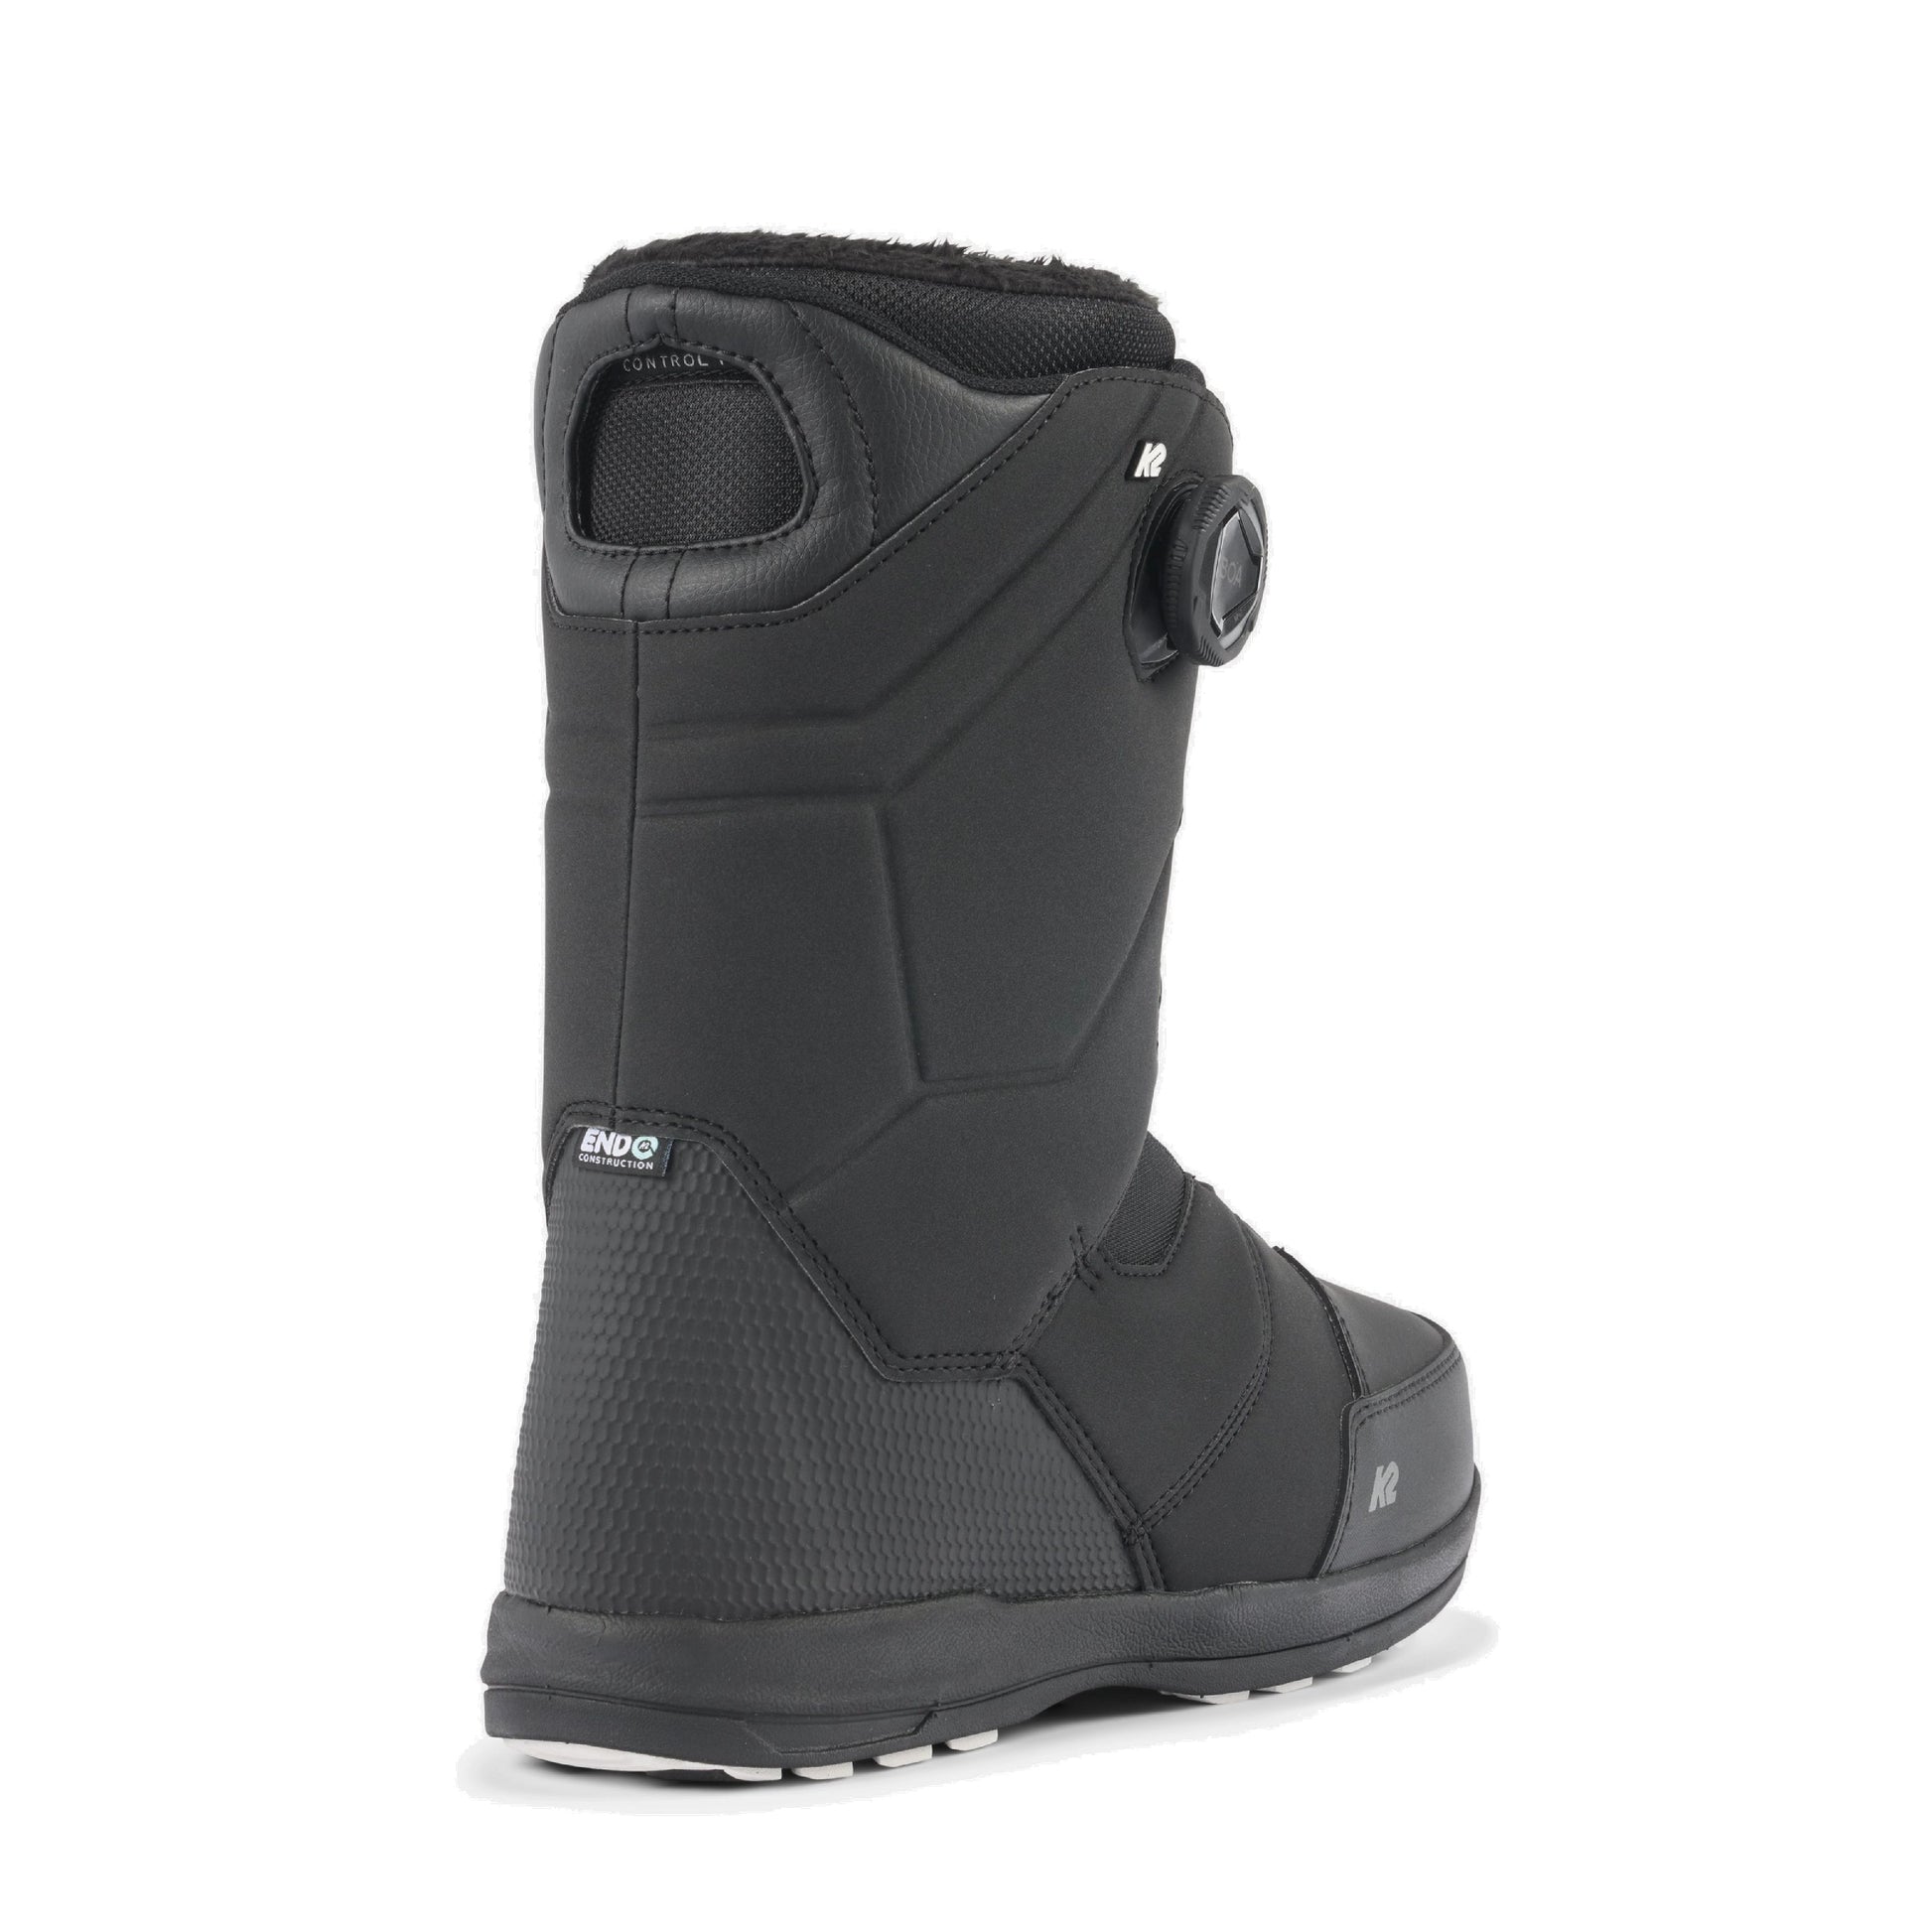 K2 Maysis Wide Snowboard Boots Black Snowboard Boots